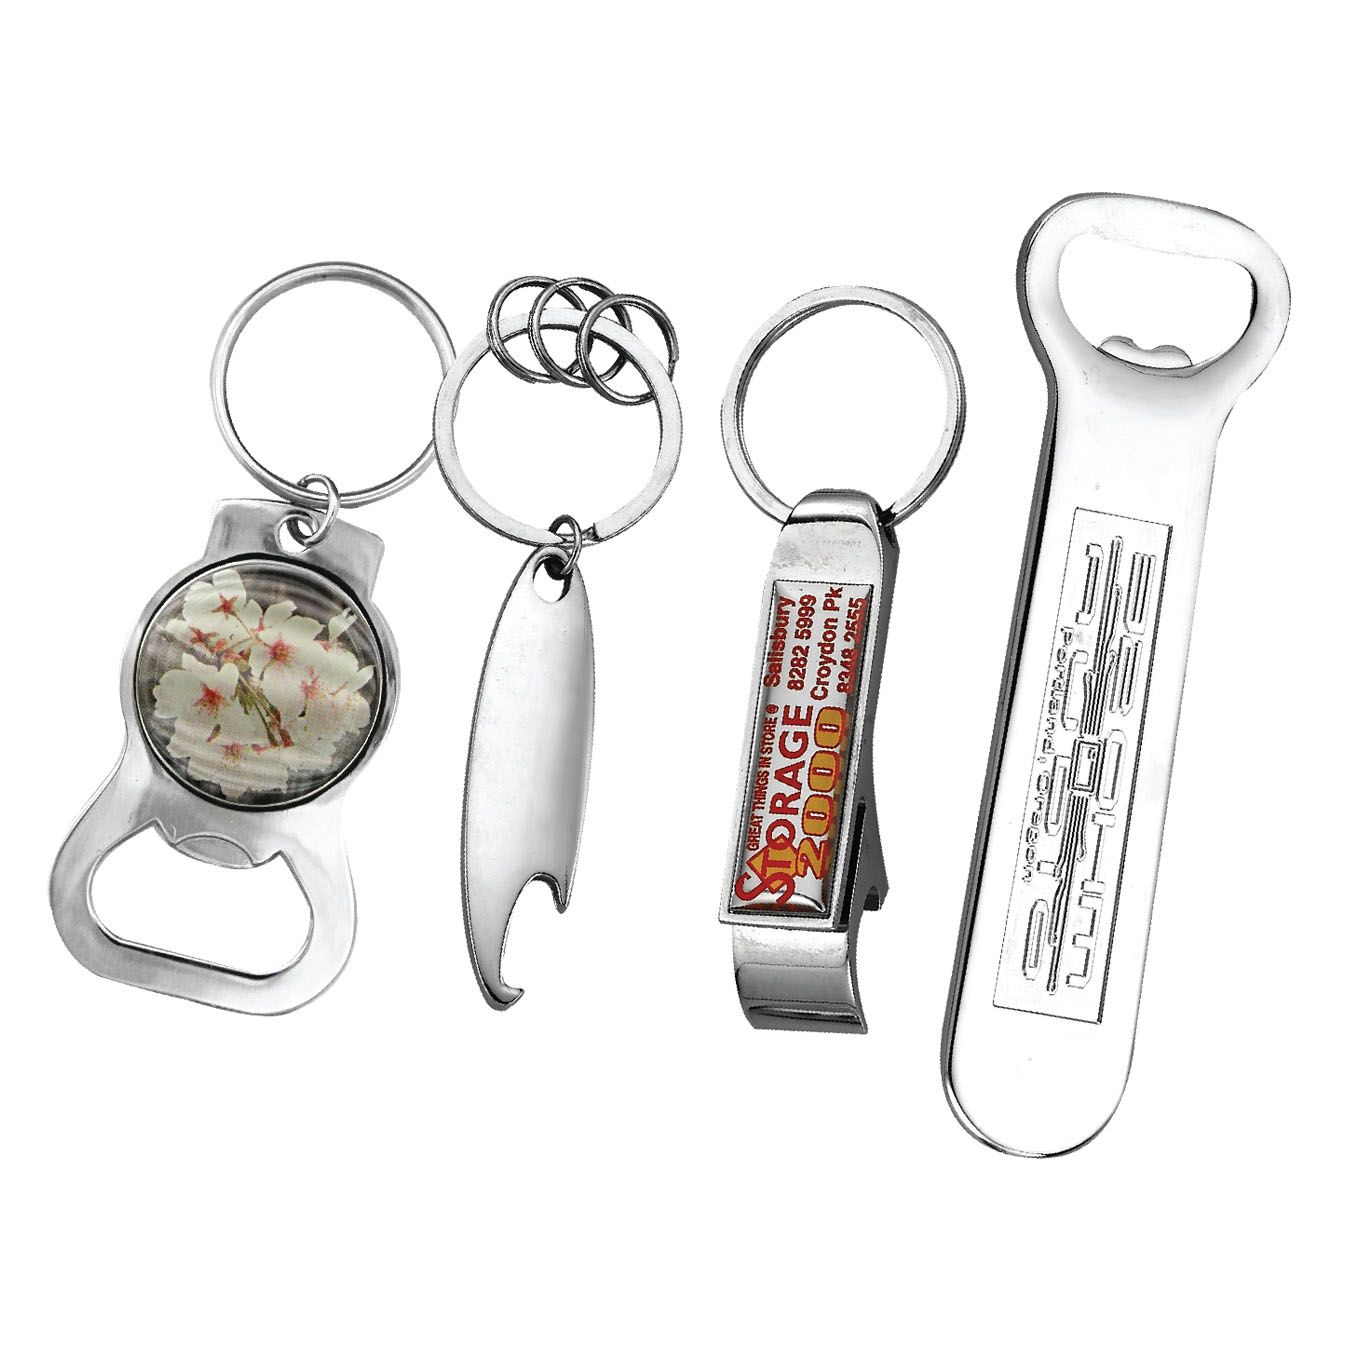 Promotional bottle openers and wine corkscrews